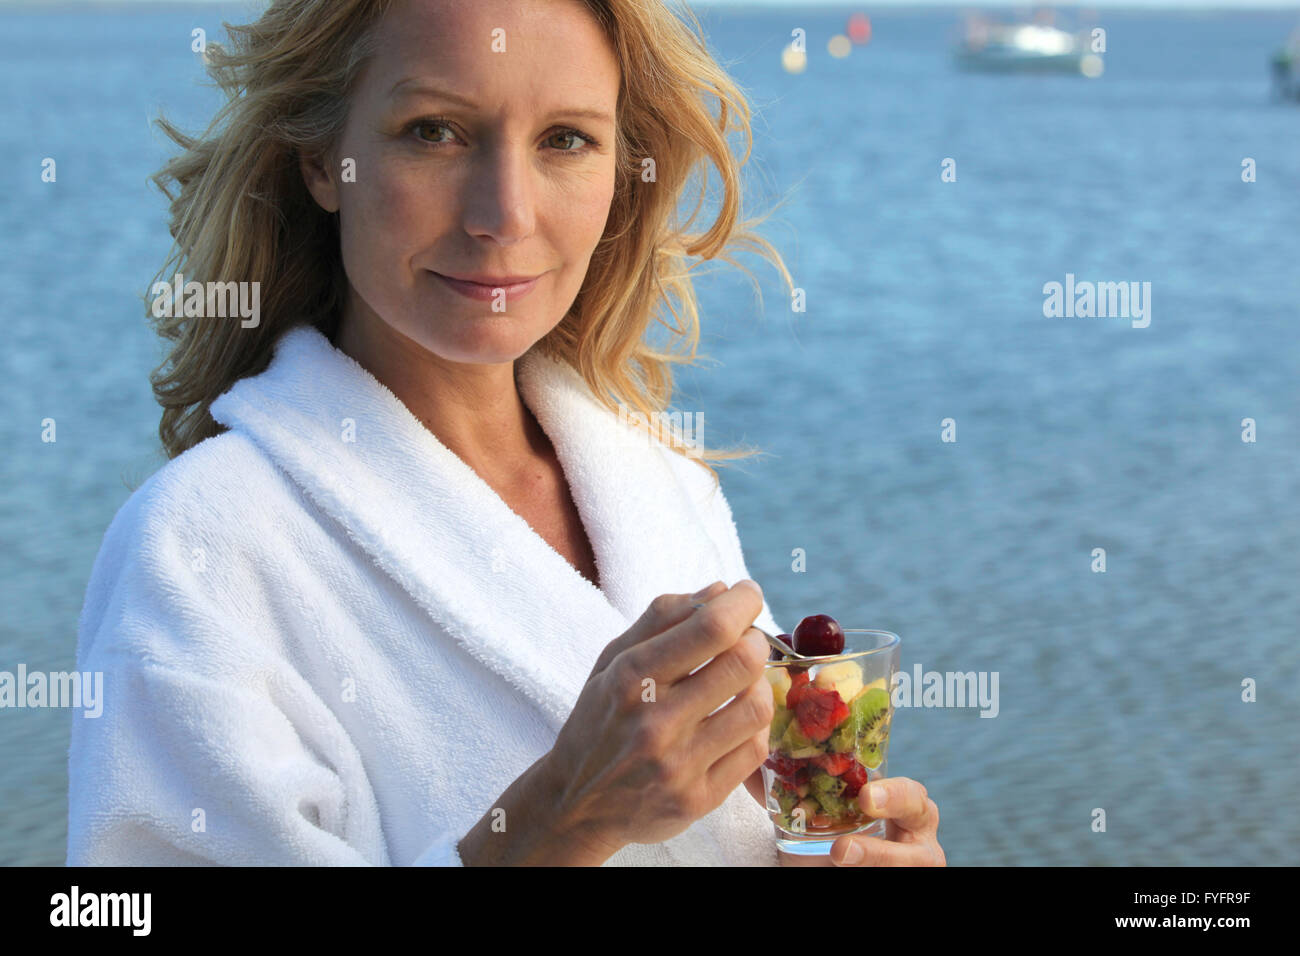 Smiling woman in toweling robe eating fruit salad Stock Photo